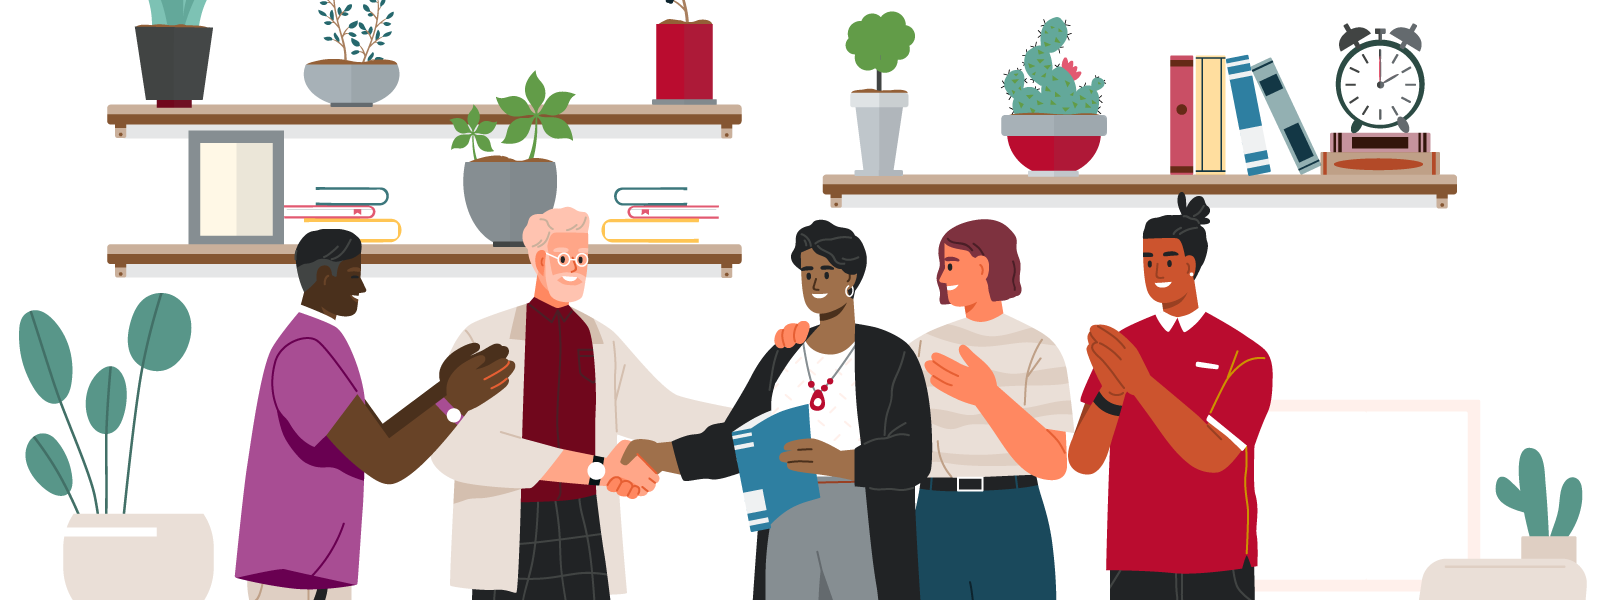 An illustration of employees congratulating another employee in an office with bookshelves in the background.